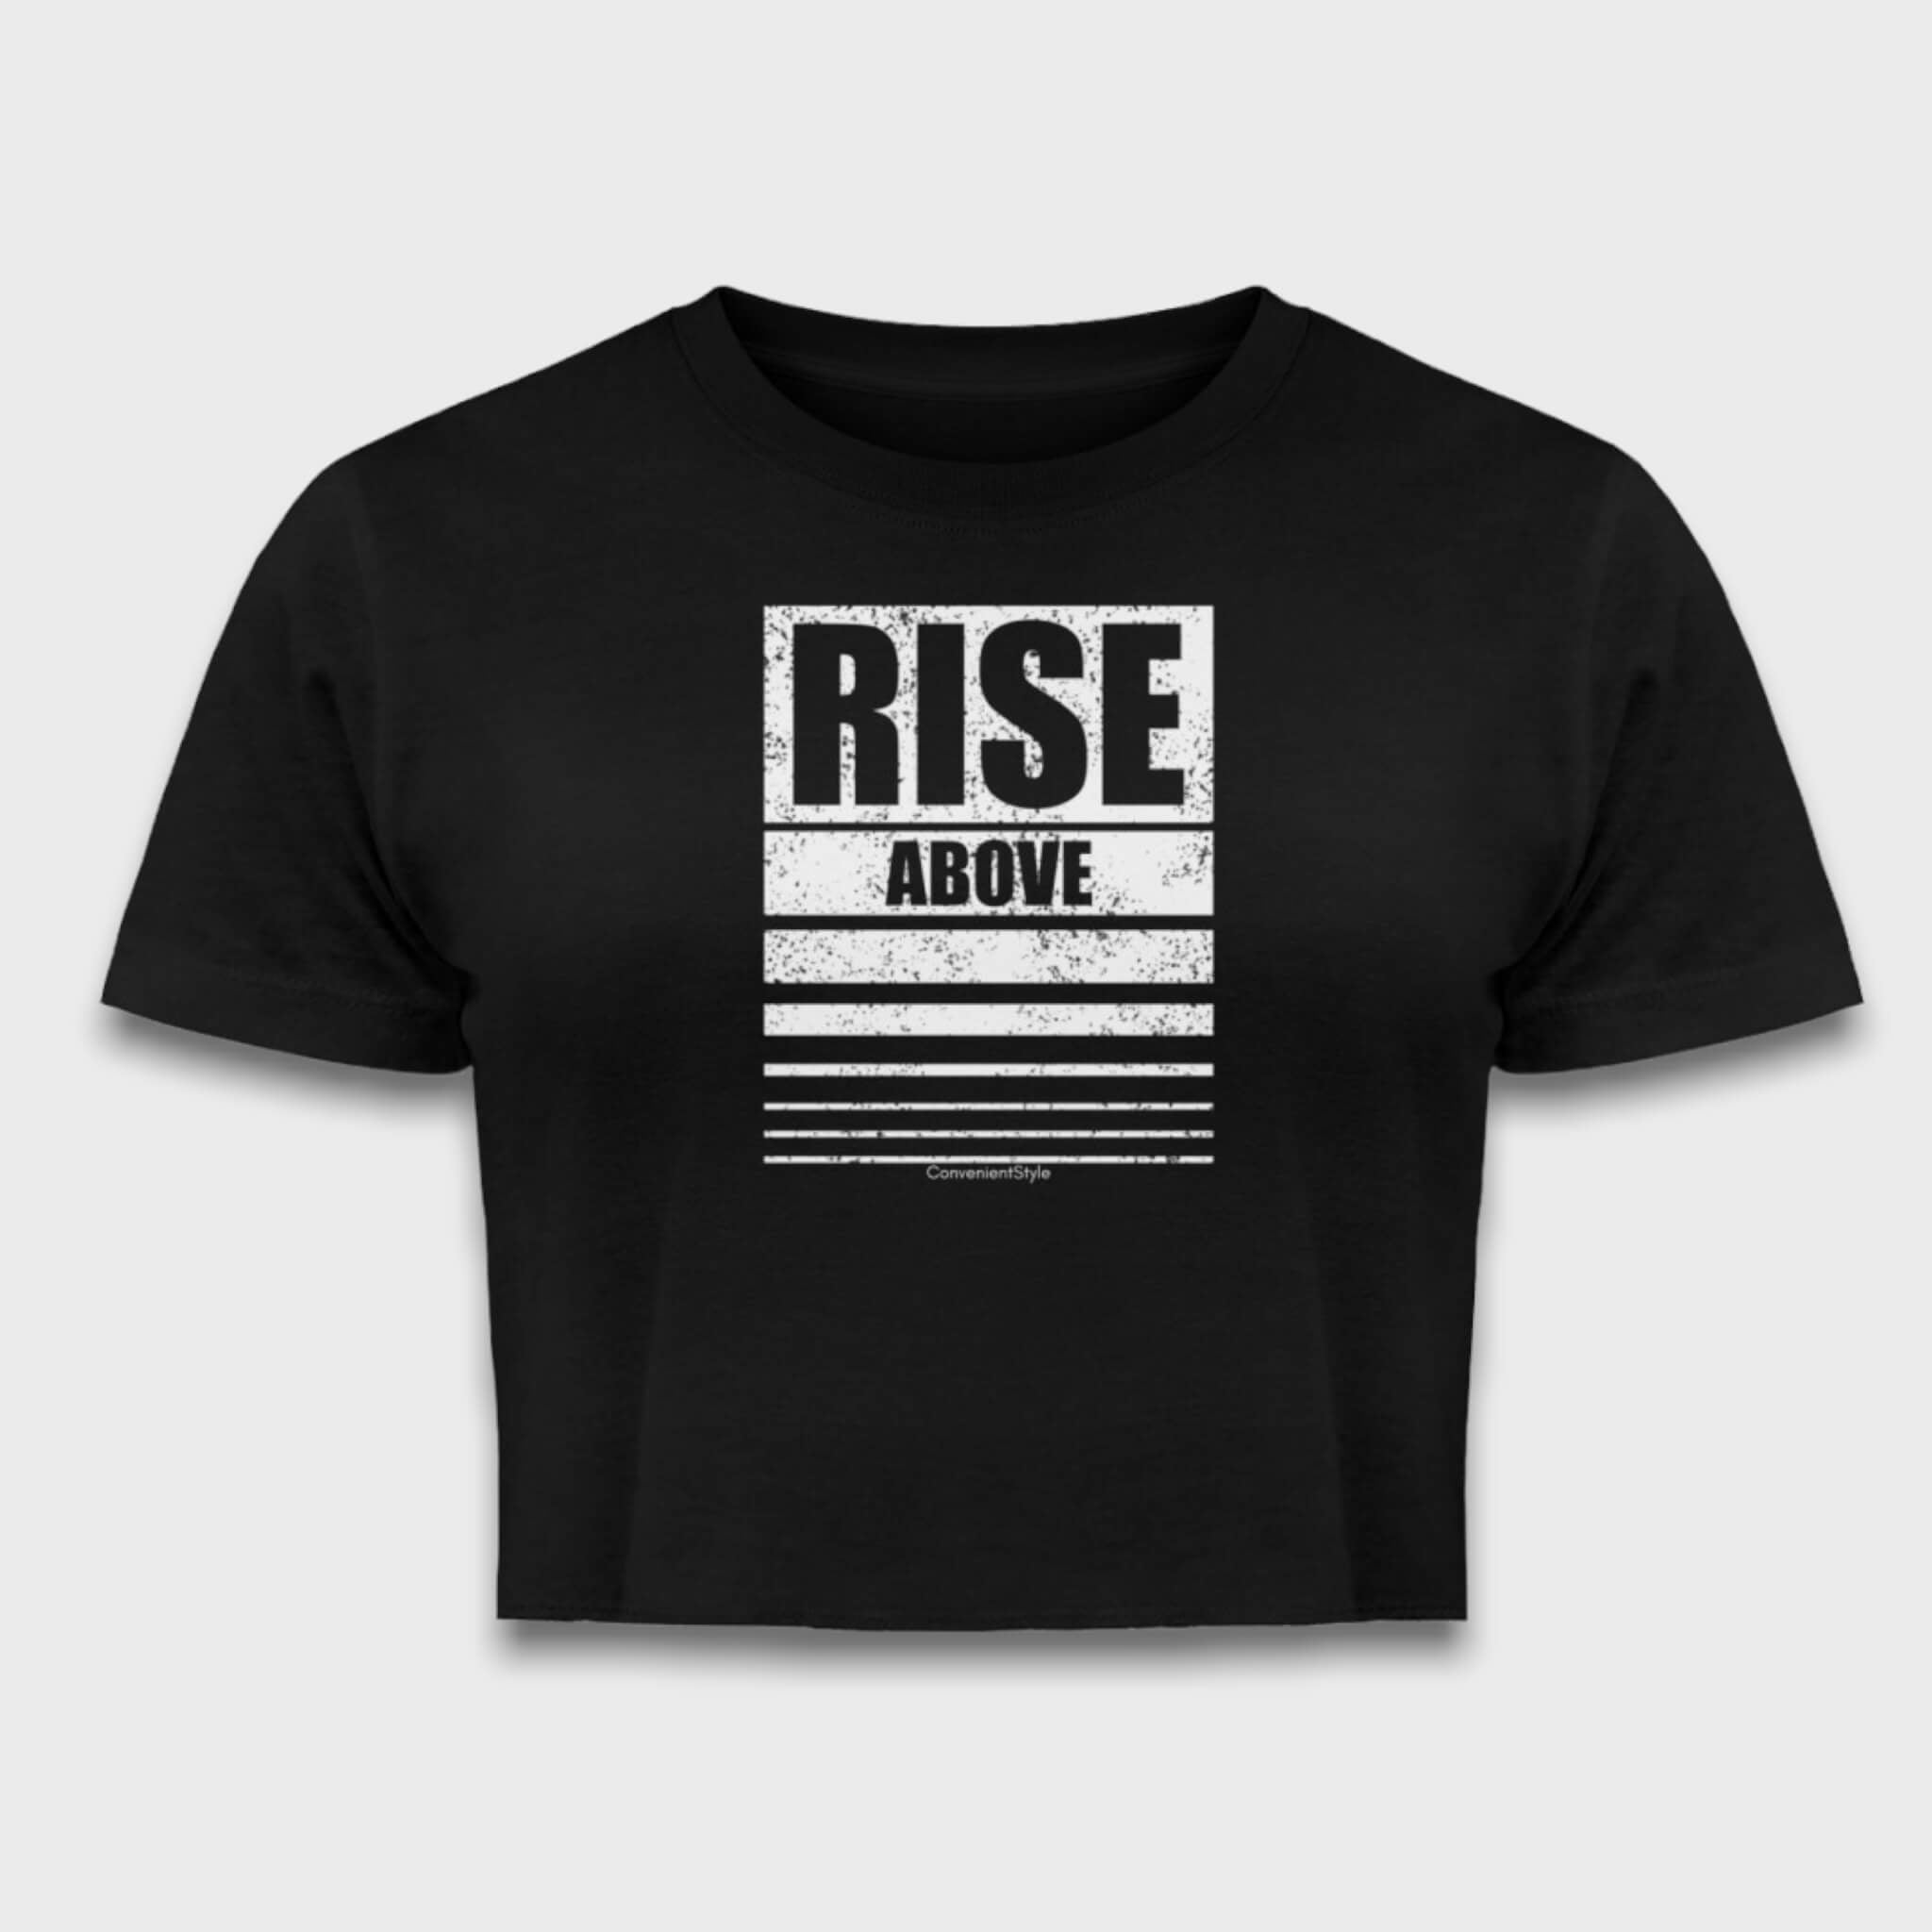 Rise above - Crop Top